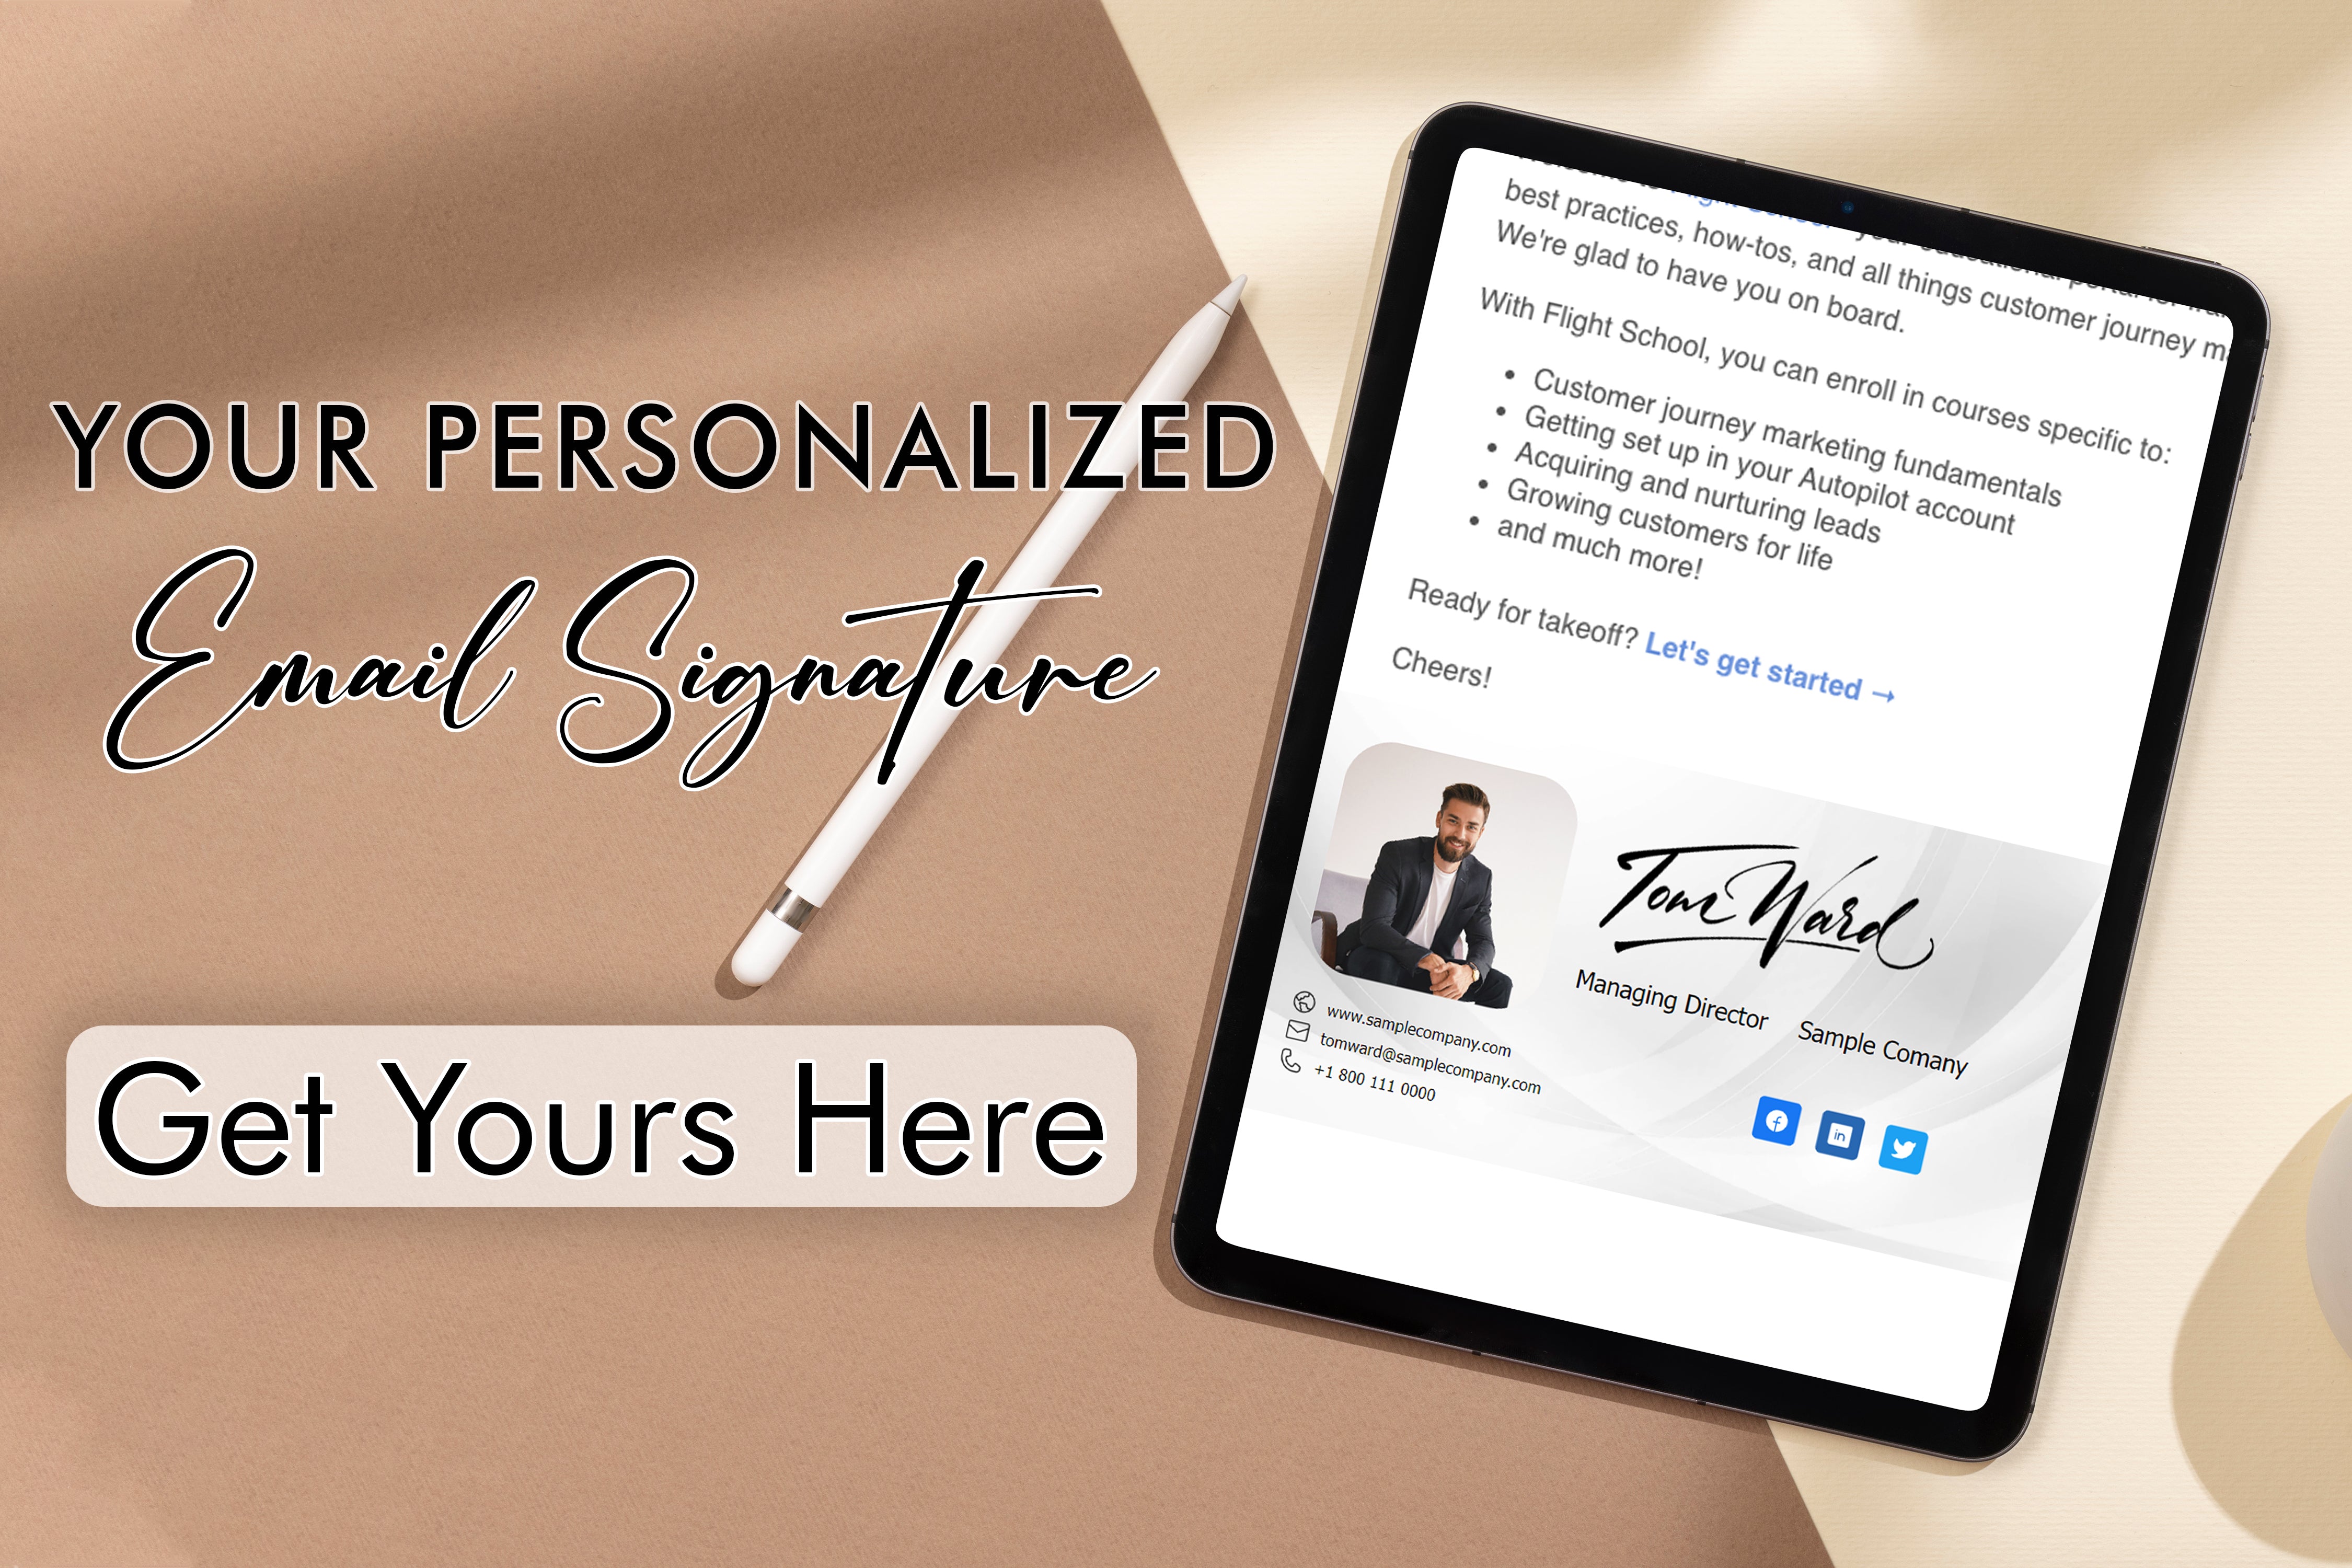 Optimize your CEO email signature for success with our comprehensive guide. Enhance your digital presence and make a lasting impression.